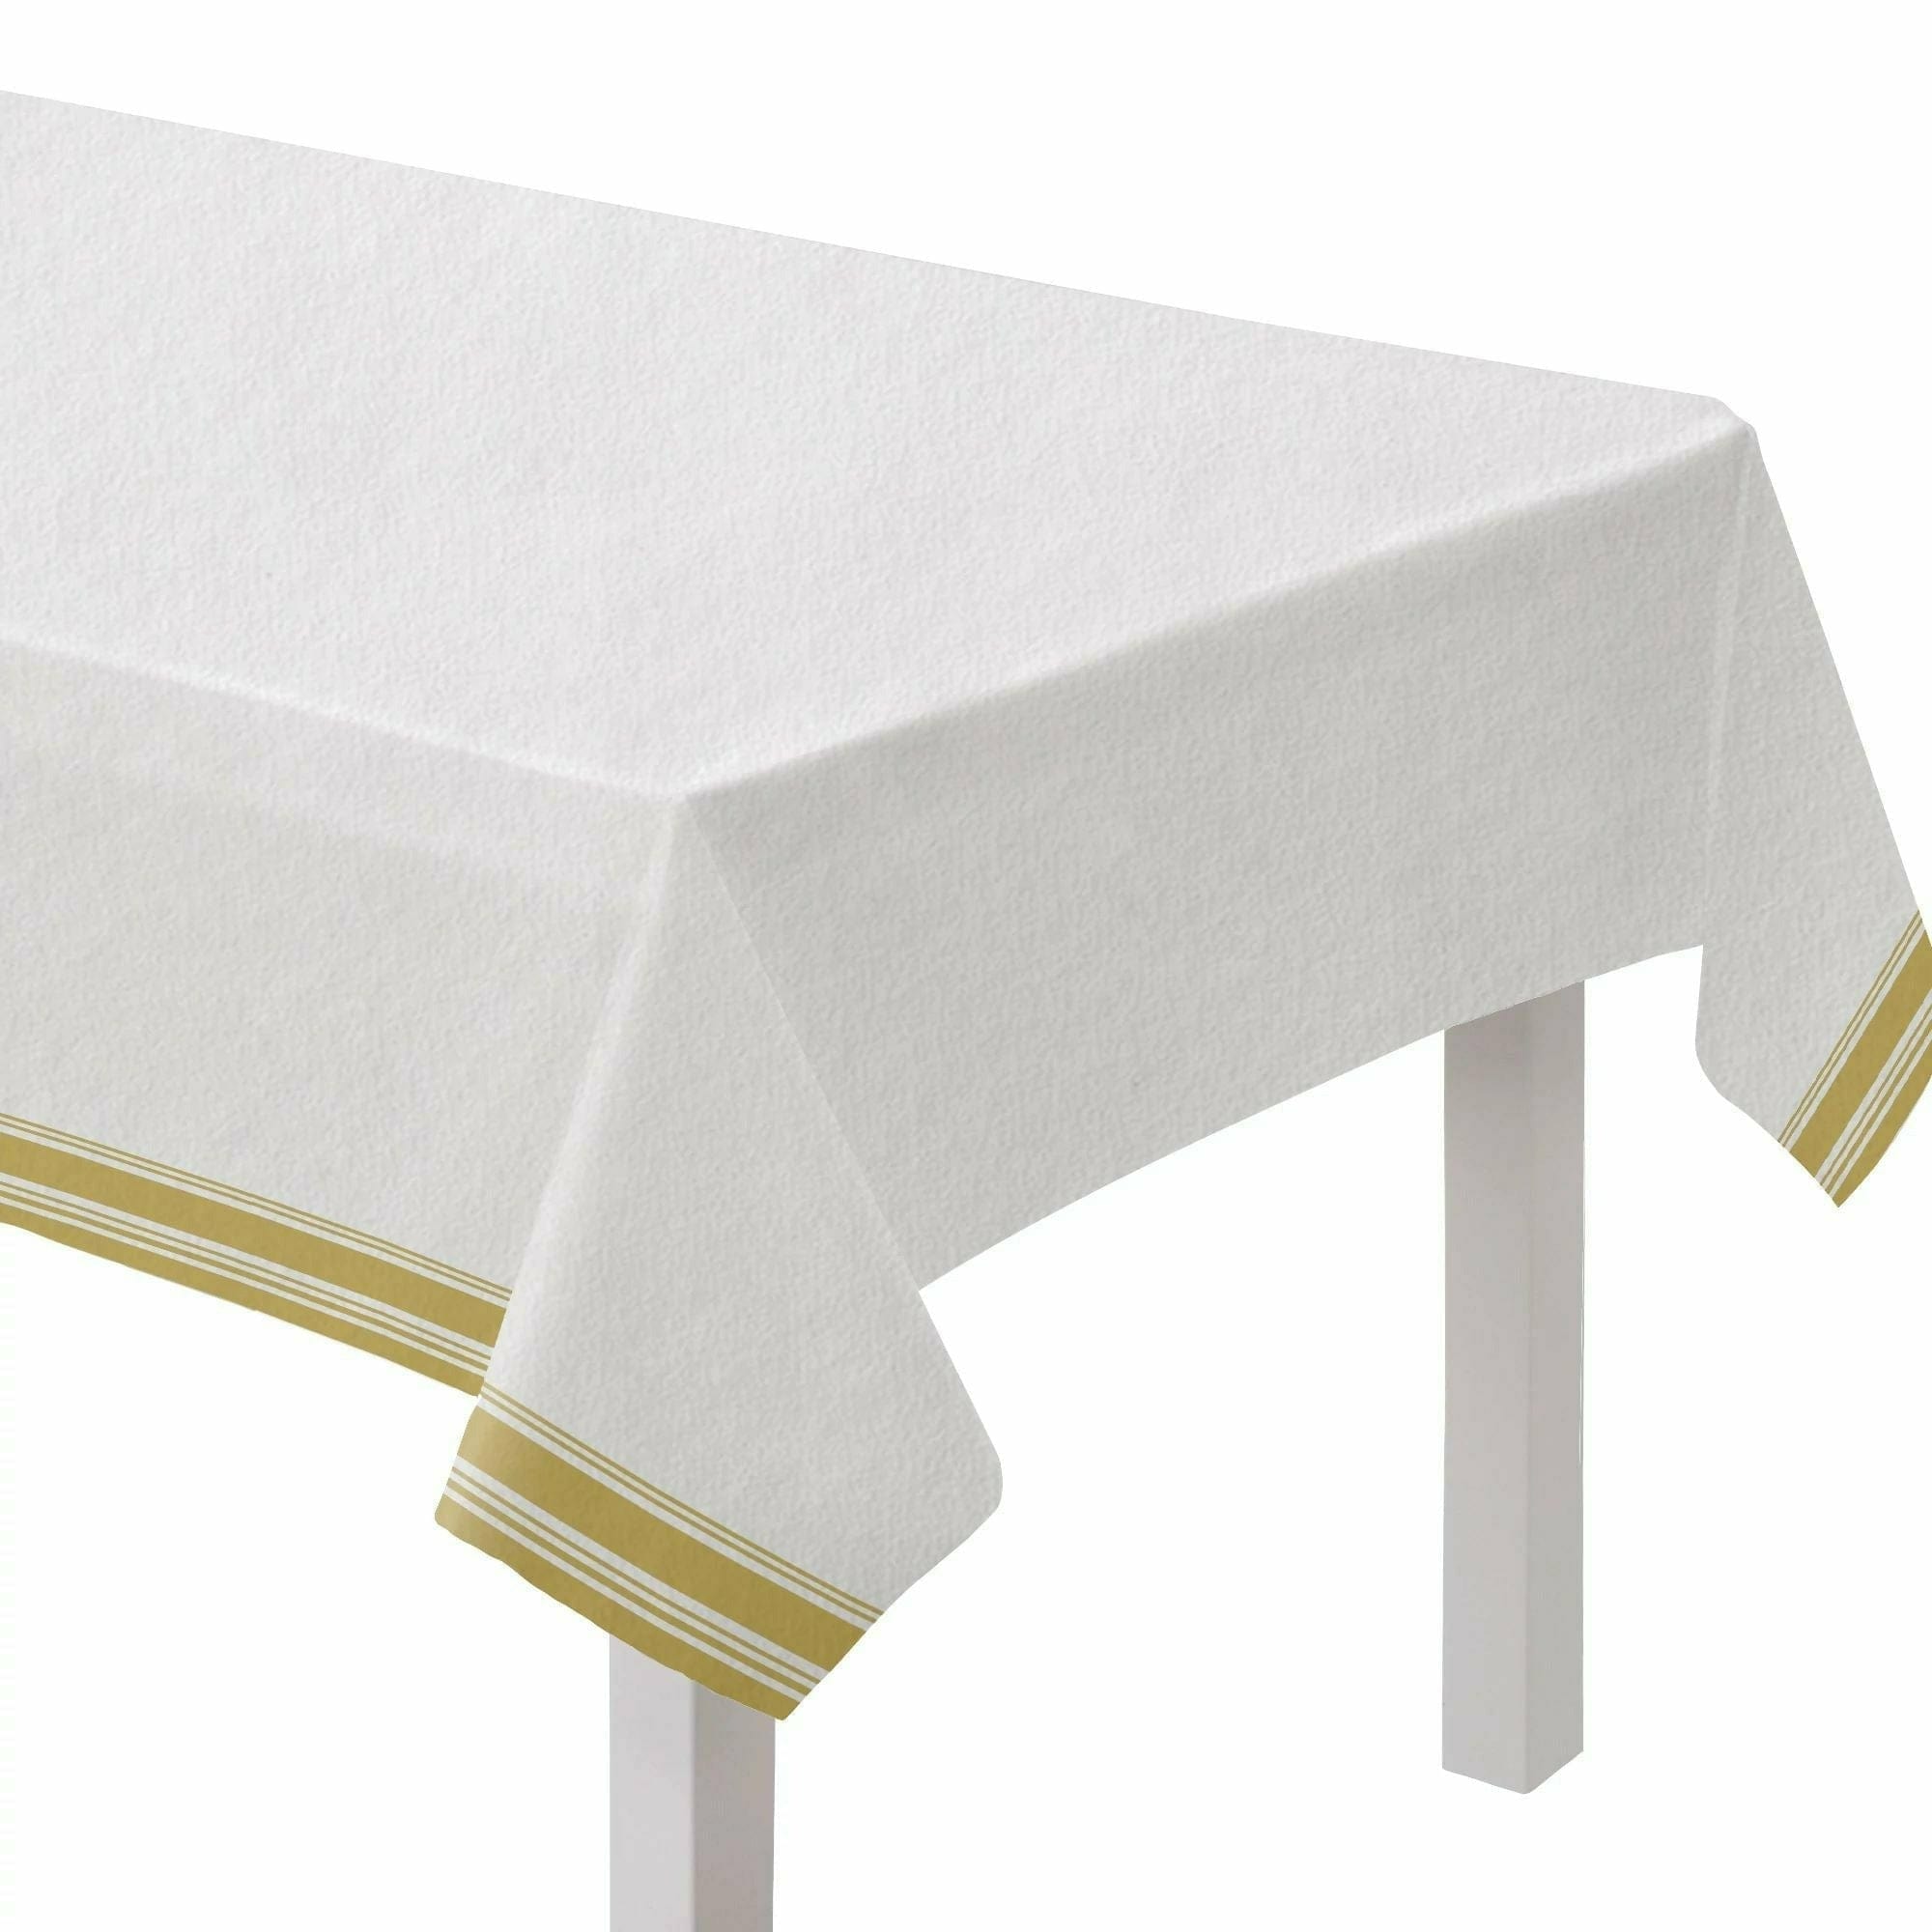 Amscan BASIC Airlaid Table Cover - Gold